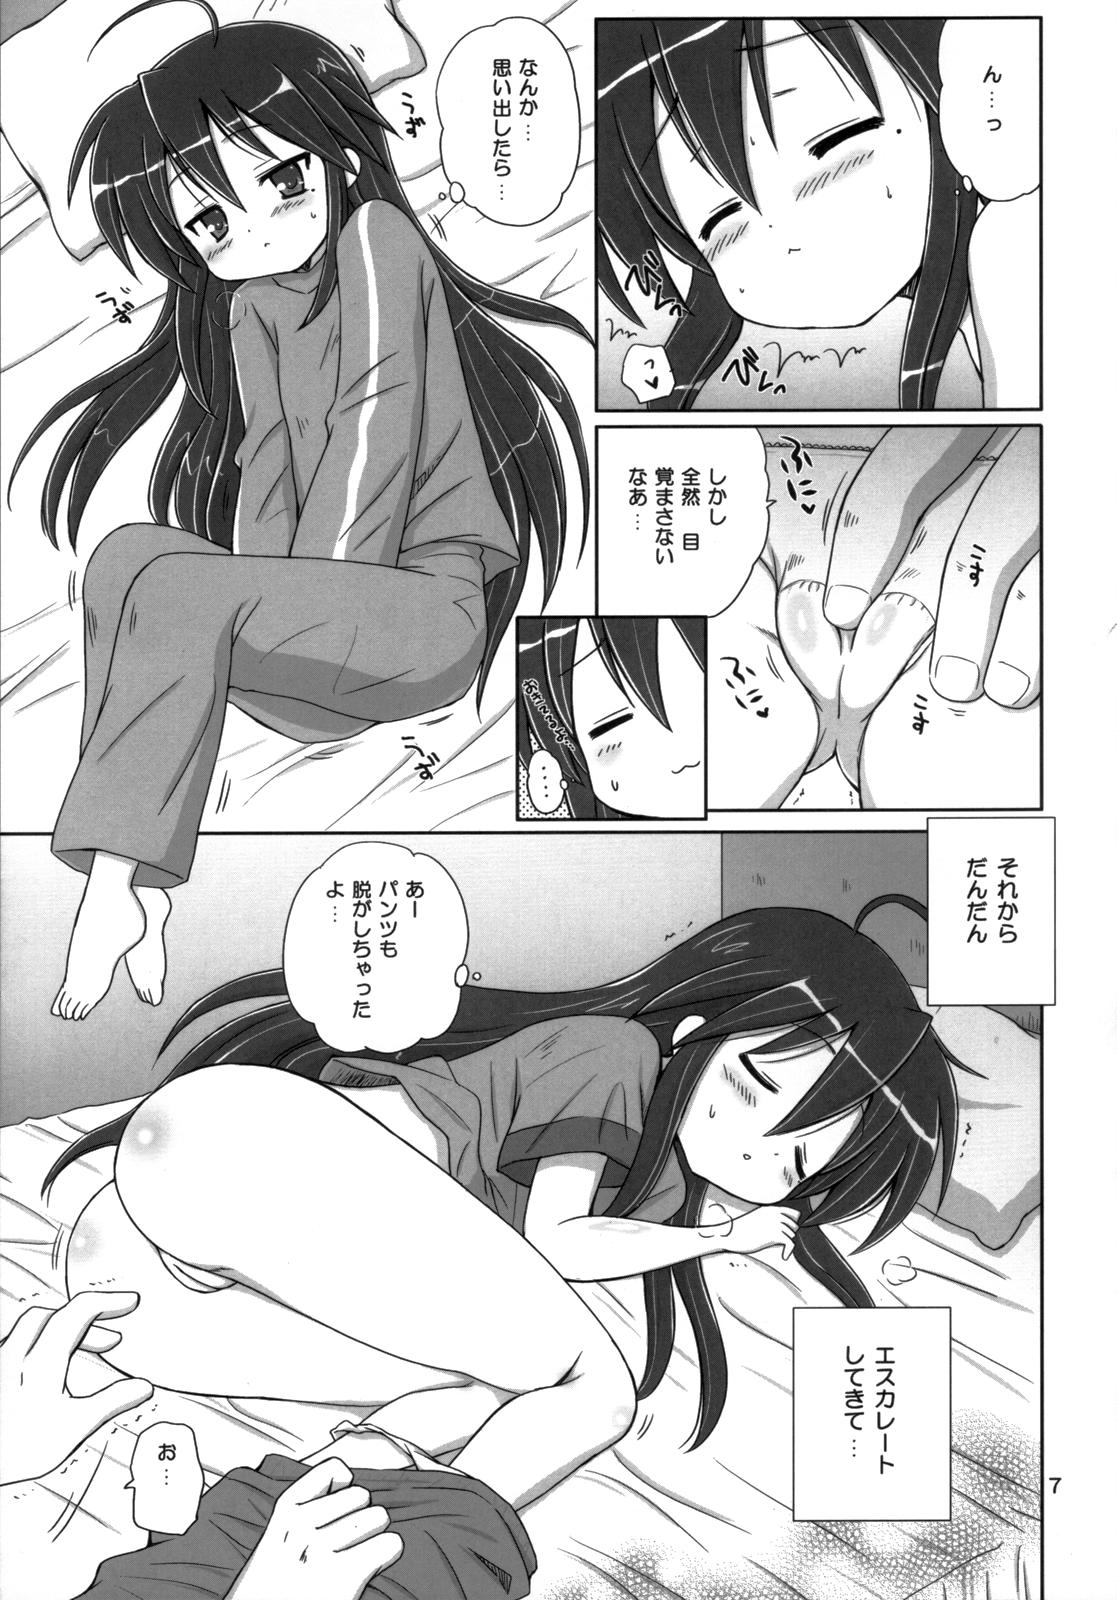 Nylons Konata Flavor - Lucky star Softcore - Page 6